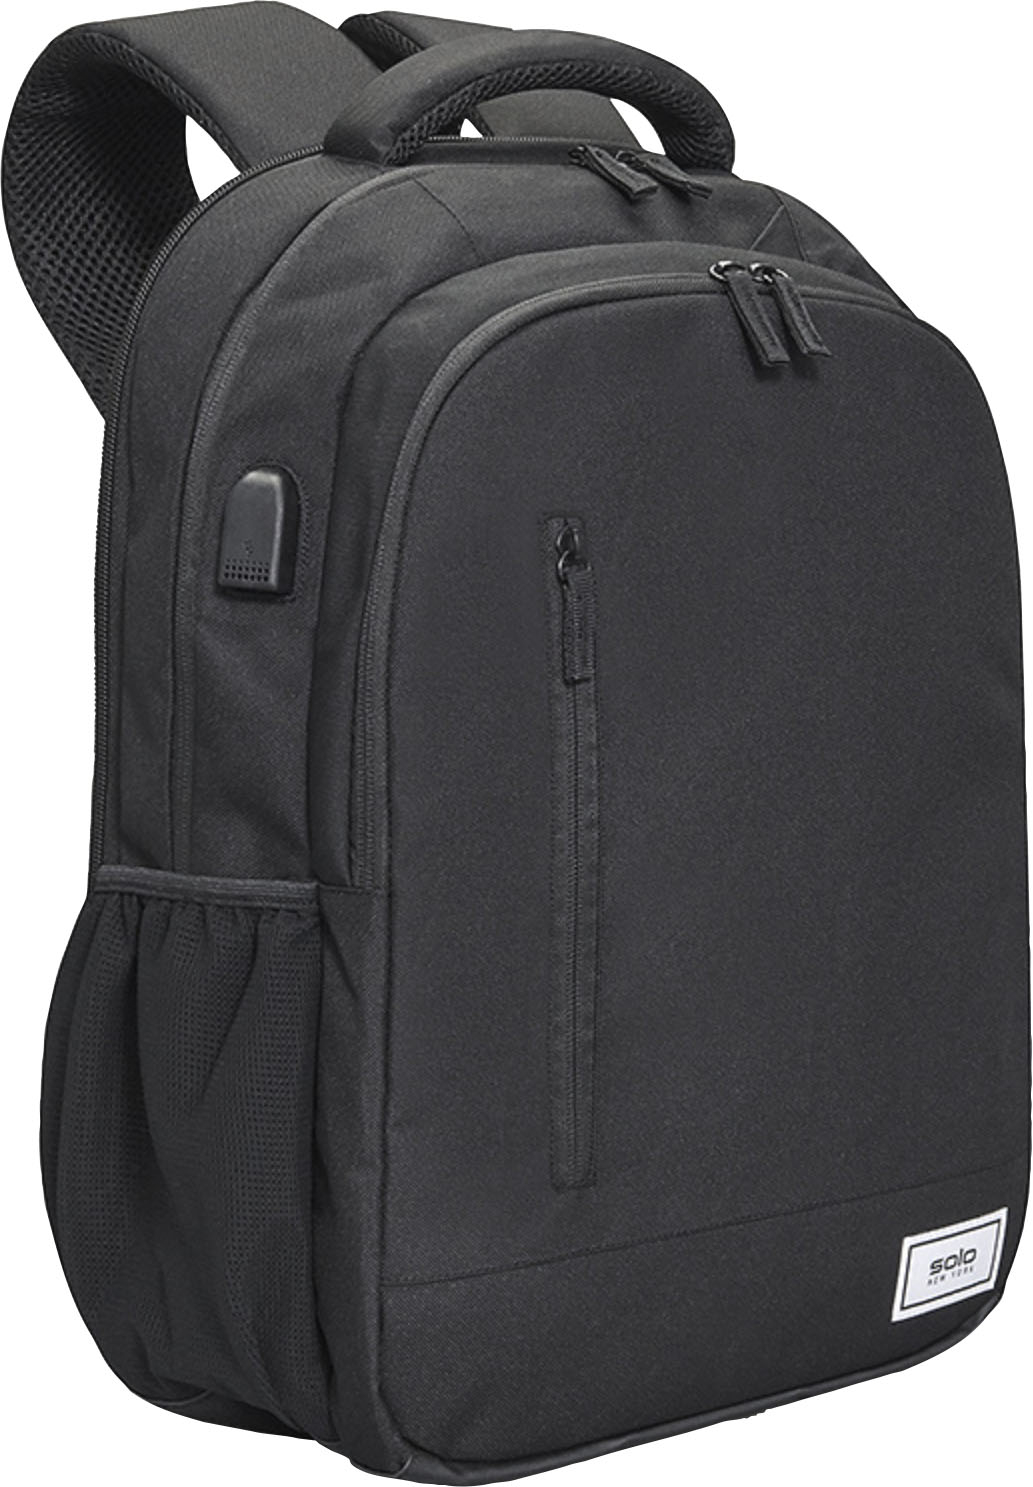 Angle View: Swissdigital Design - Circuit TSA-firendly Backpack with USB Charging port/RFID protection and fits up to 15.6" laptop - Black